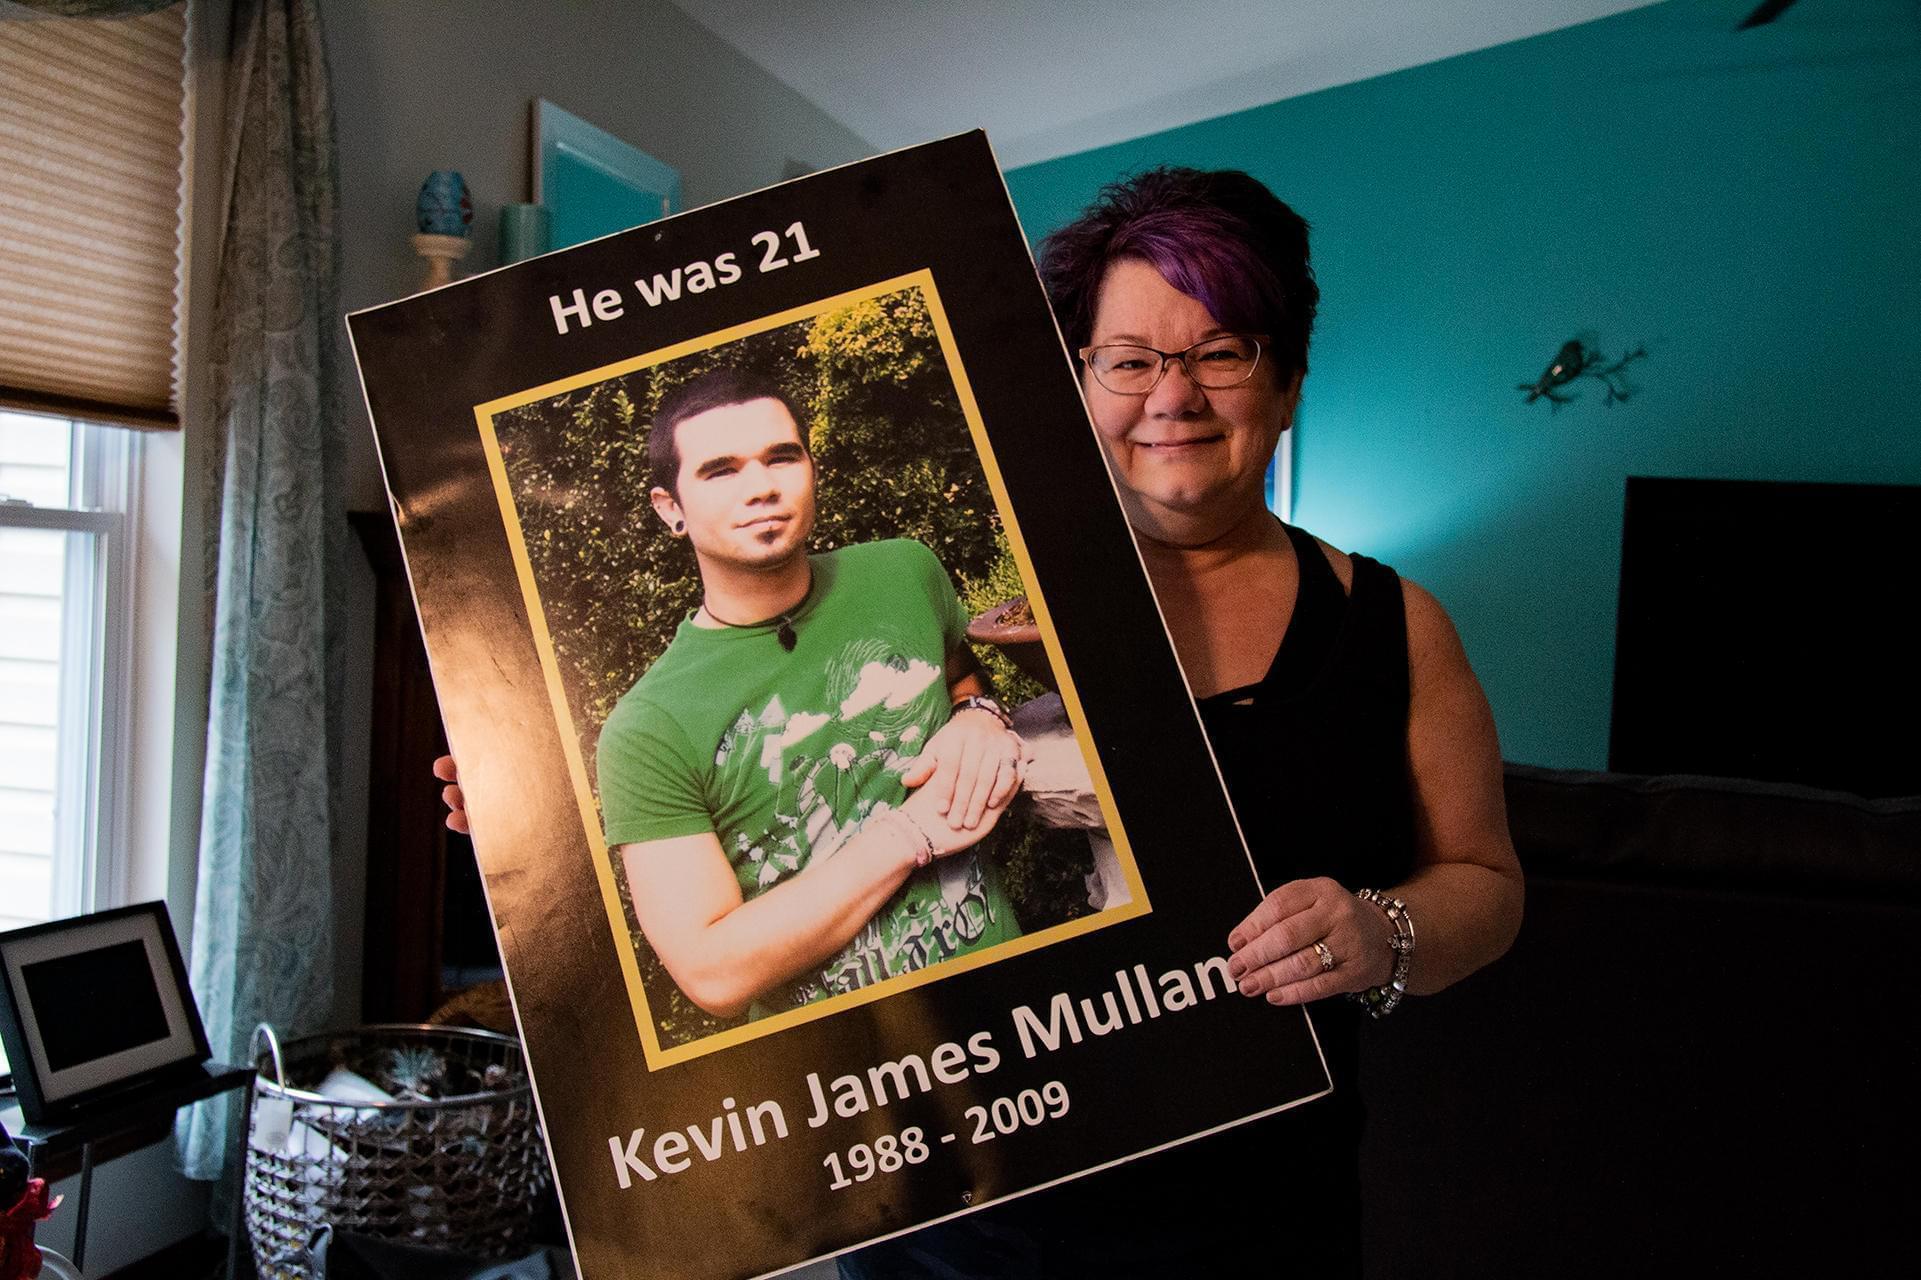 Kathi Arbini holds a photograph of her son, Kevin Mullane, who died of a heroin overdose at the age of 21.